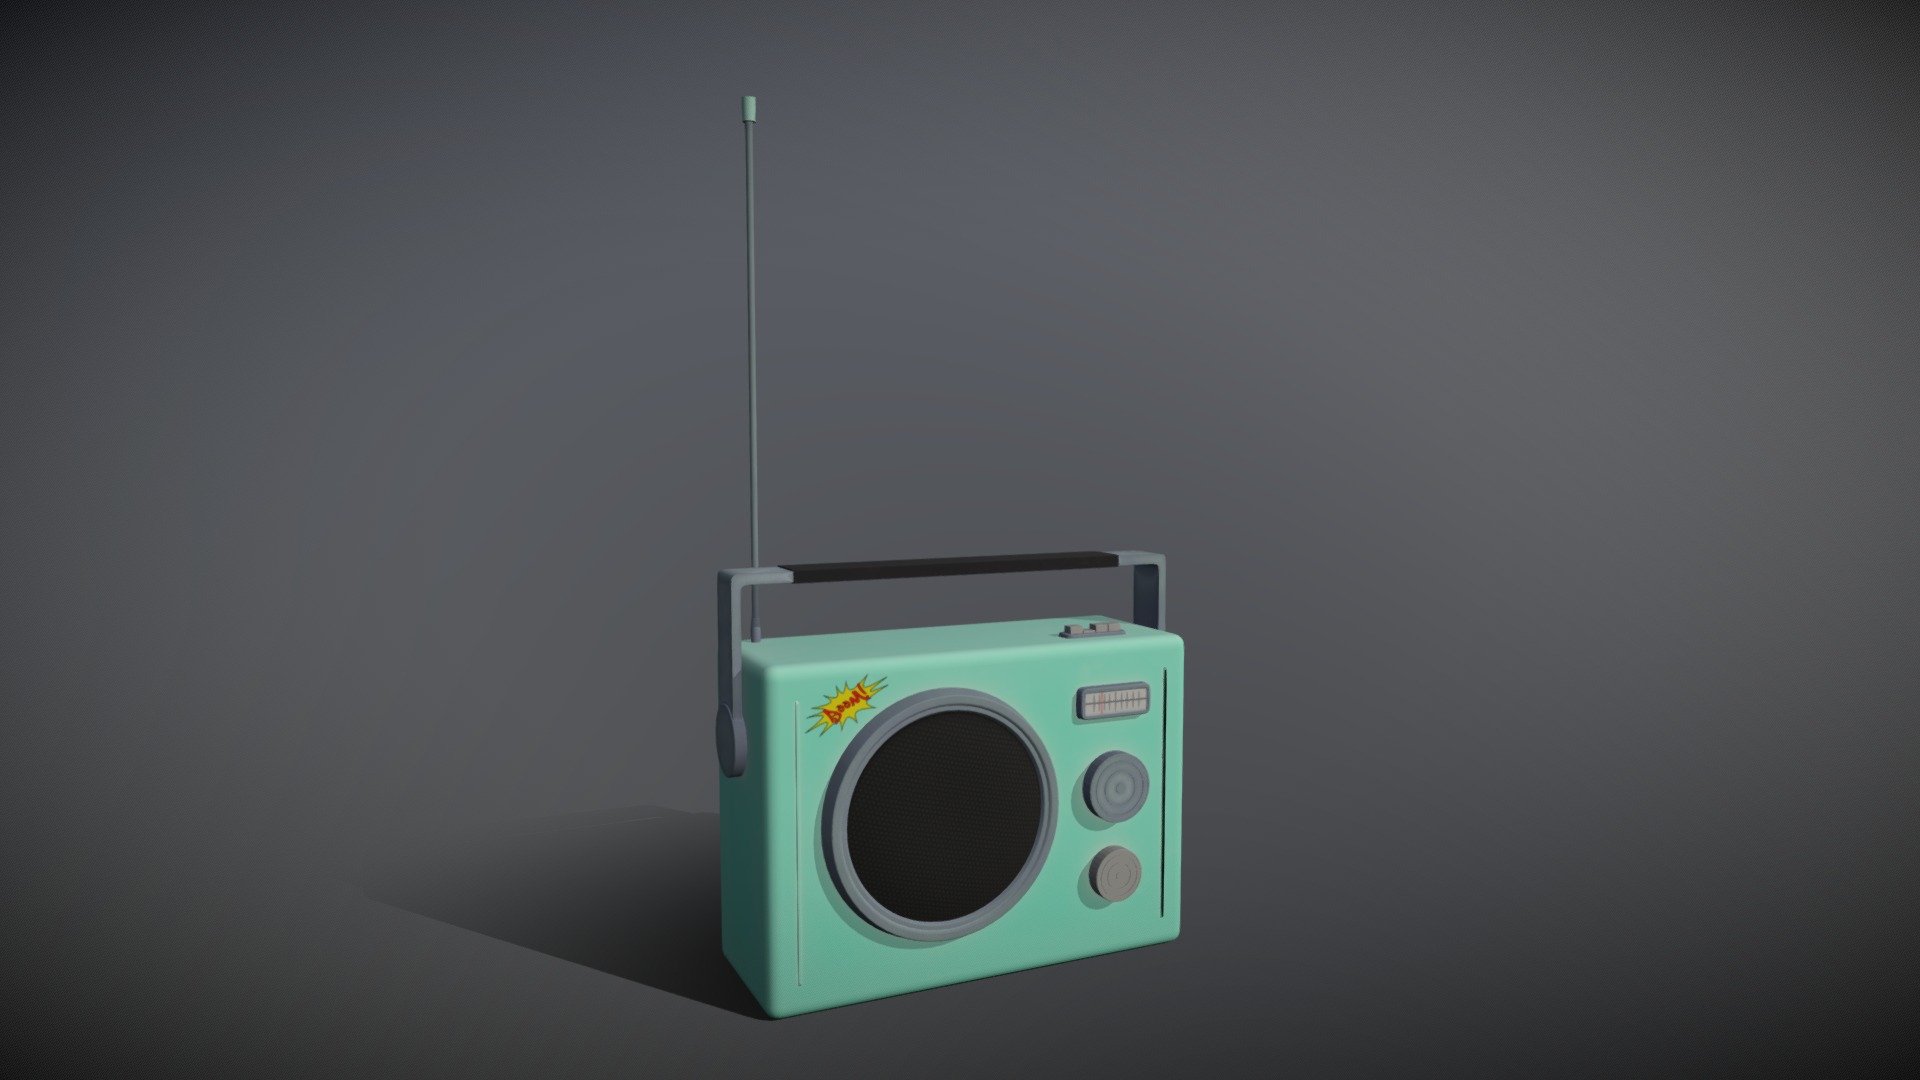 Hand painted low-poly game ready Retro Radio

Made in 3dsMax 2017, textured in Photoshop and Substance Painter

Graffiti/Stickers are hand-painted

My first model on sketchfab :D - Retro Radio - 3D model by Art-Teeves 3d model